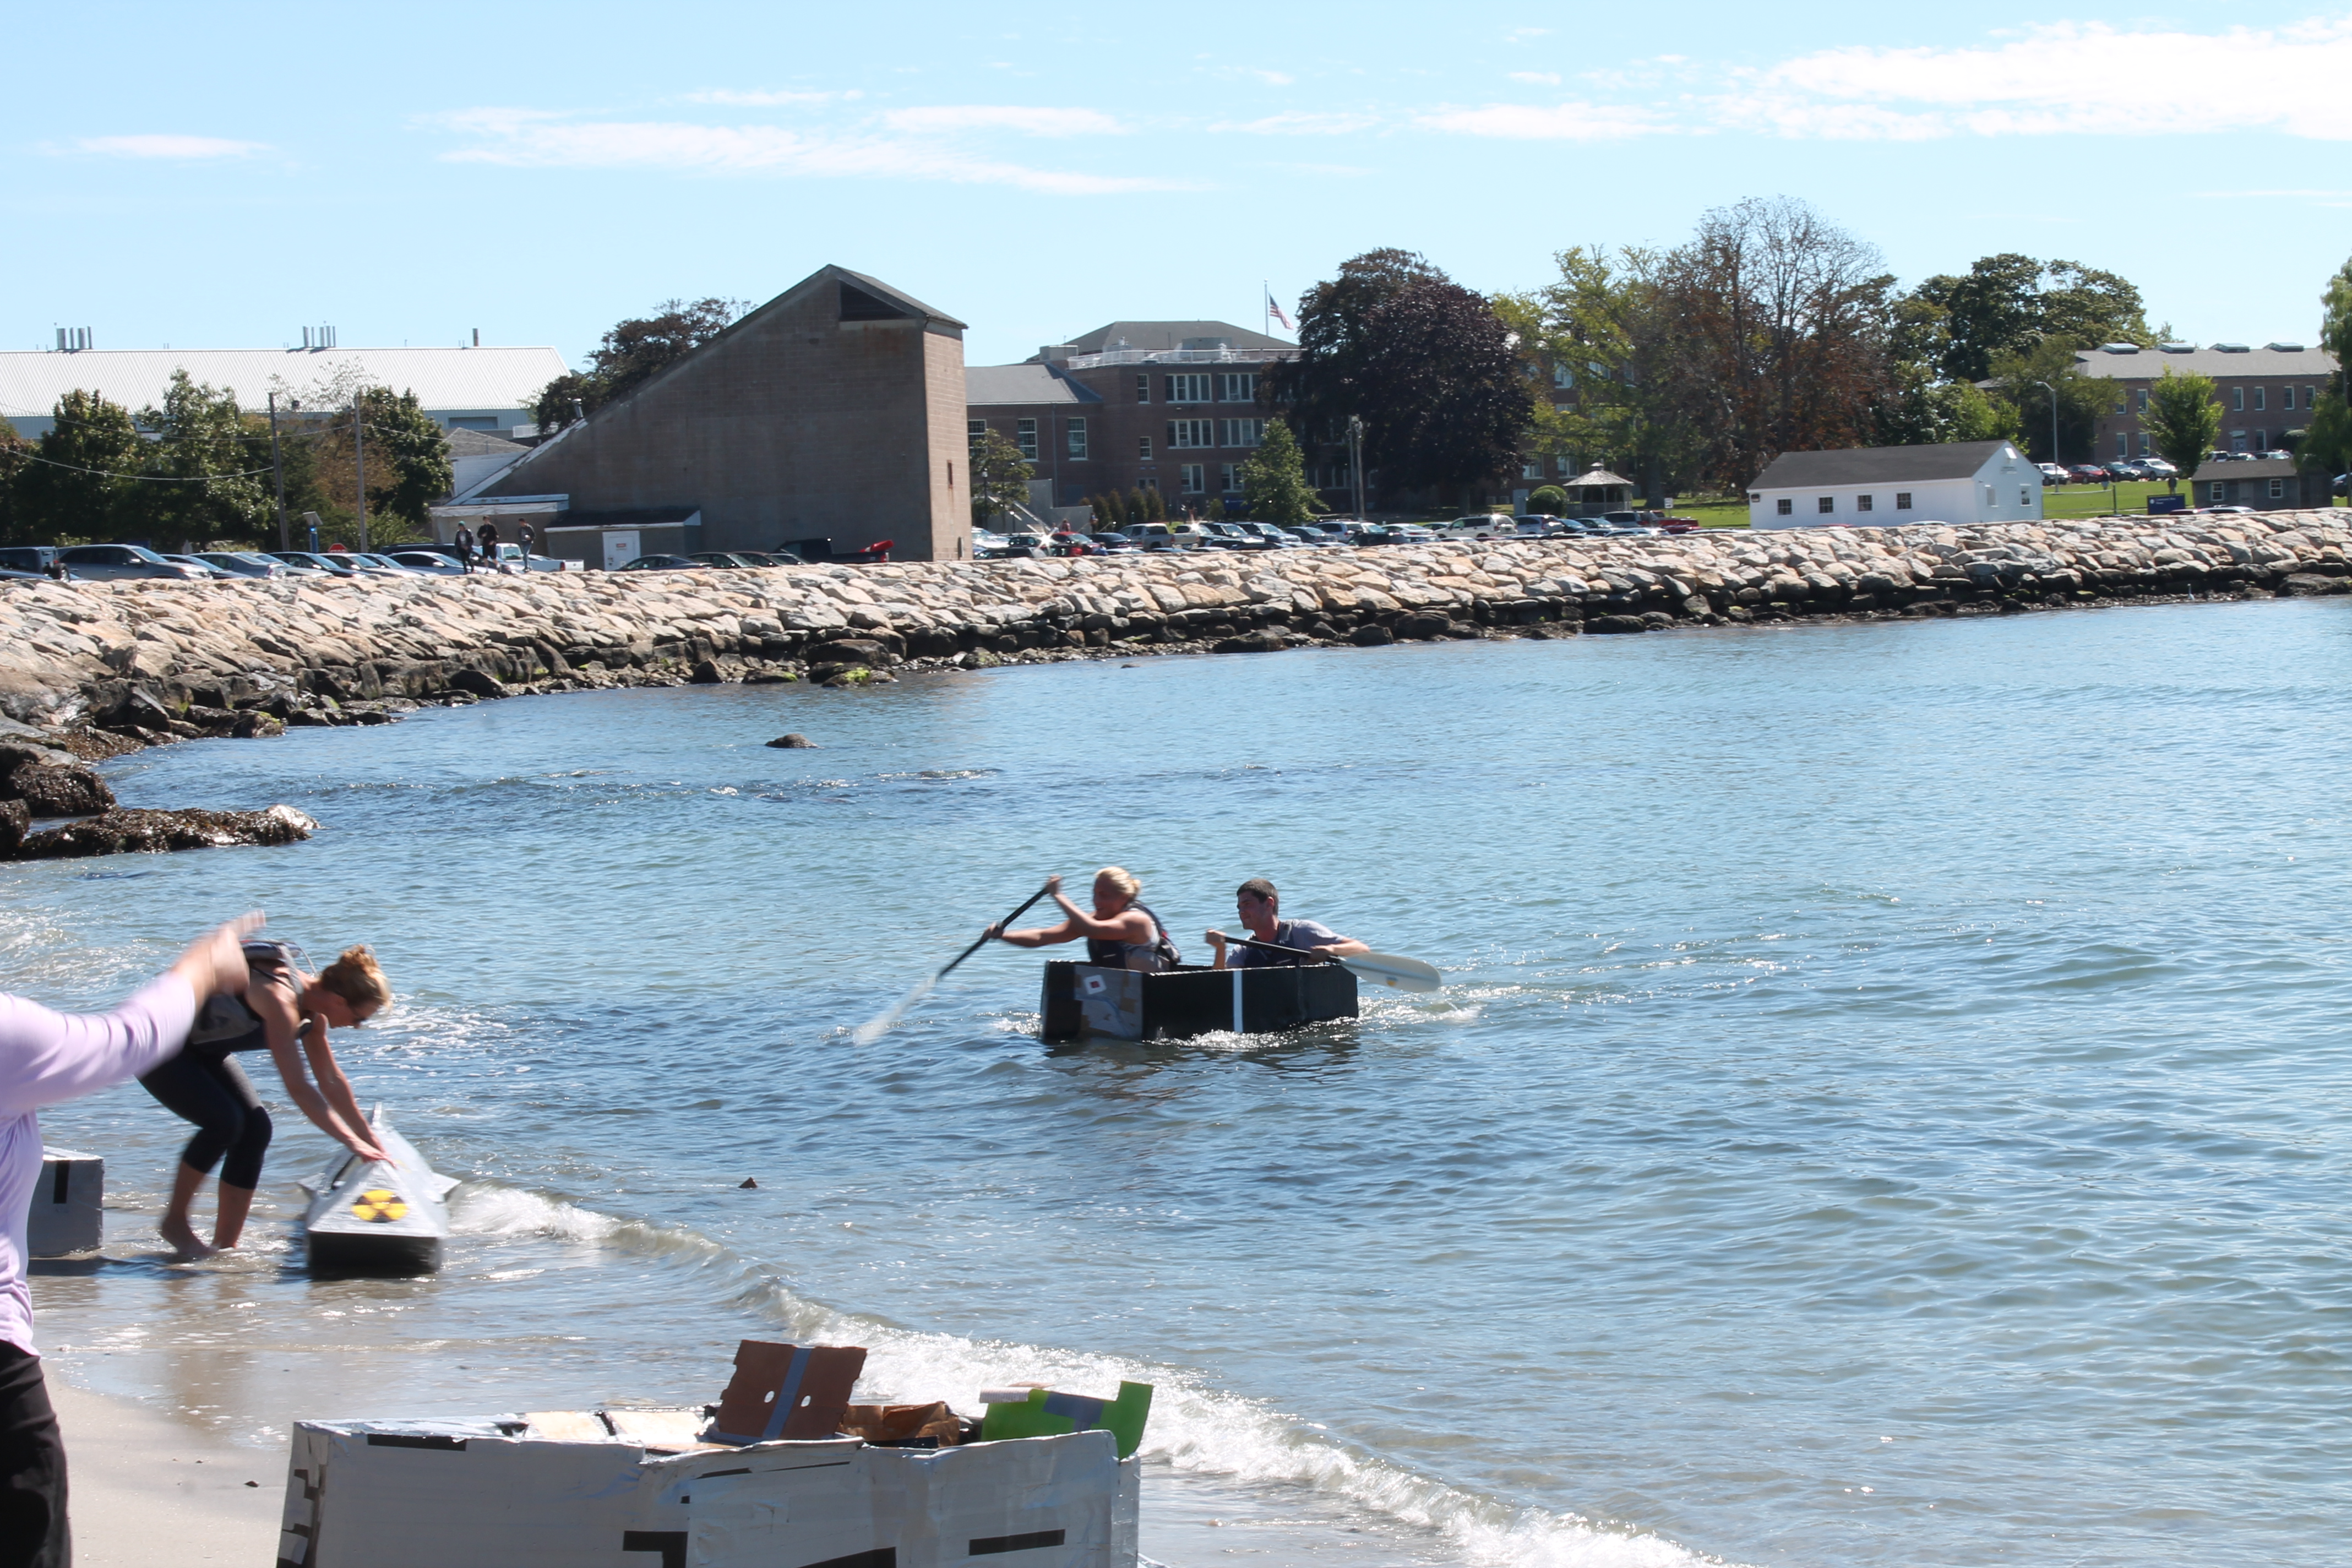 Action scene from the Cardboard Boat Race